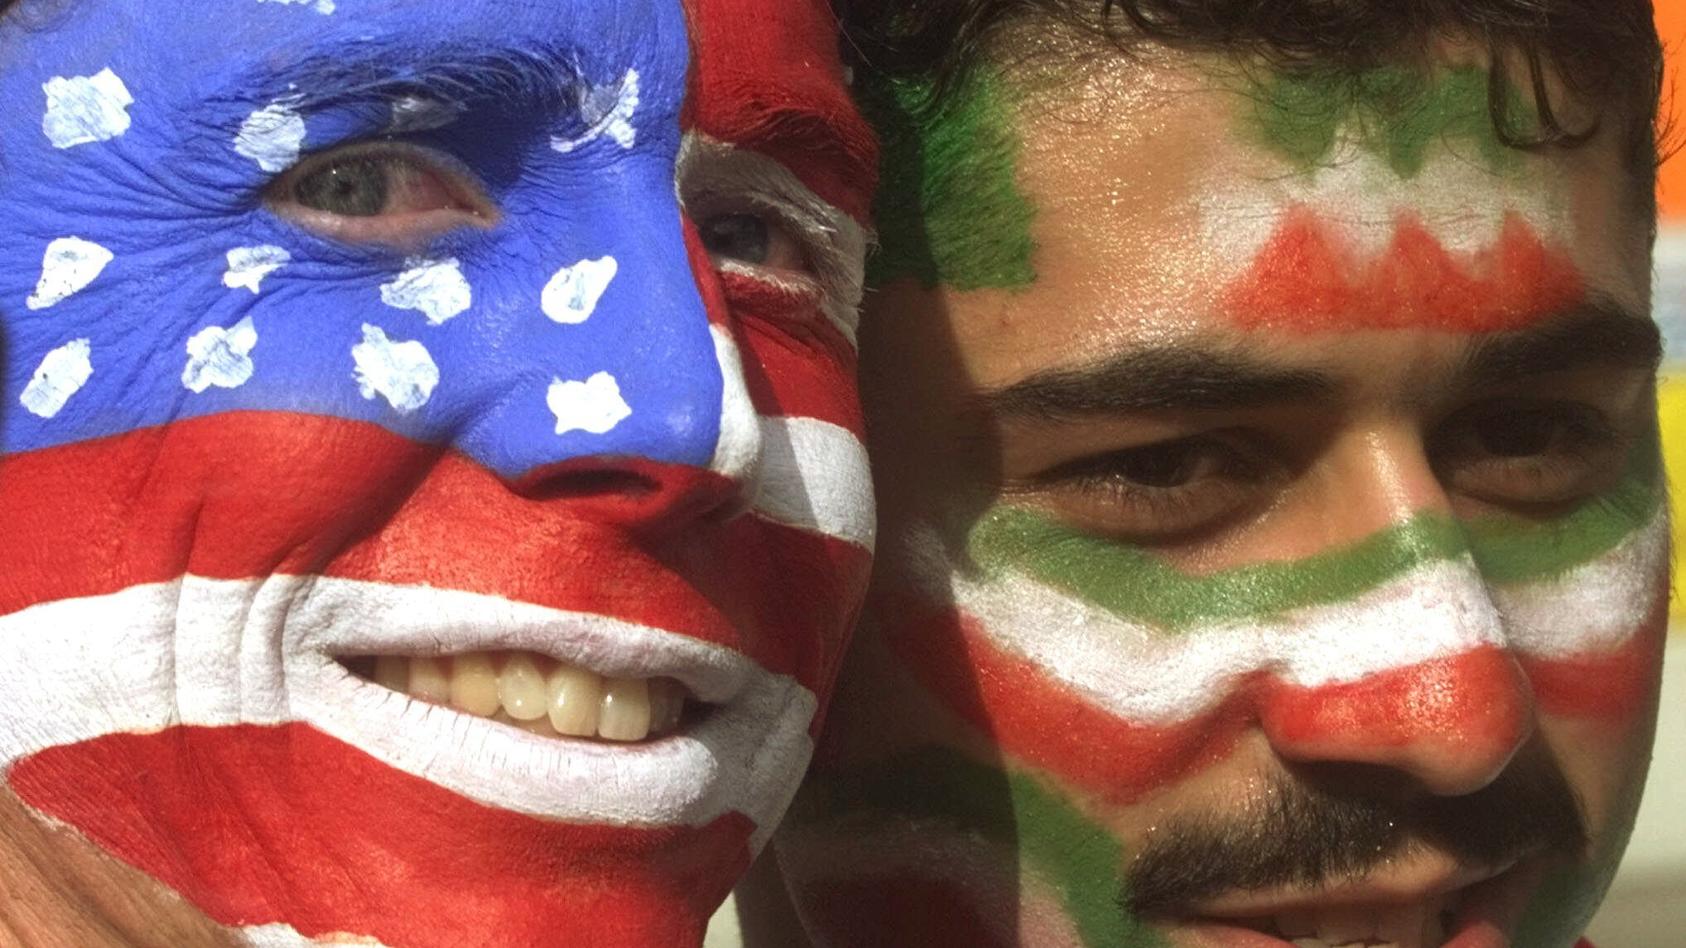 FILE - Mike Moscrop, left, from Orange County, Calif., poses with Amir Sieidoust, an Iranian supporter living in Holland outside the Gerlain Stadium in Lyon, June 21, 1998, before the start of the USA vs Iran World Cup soccer match. Iran defeated the